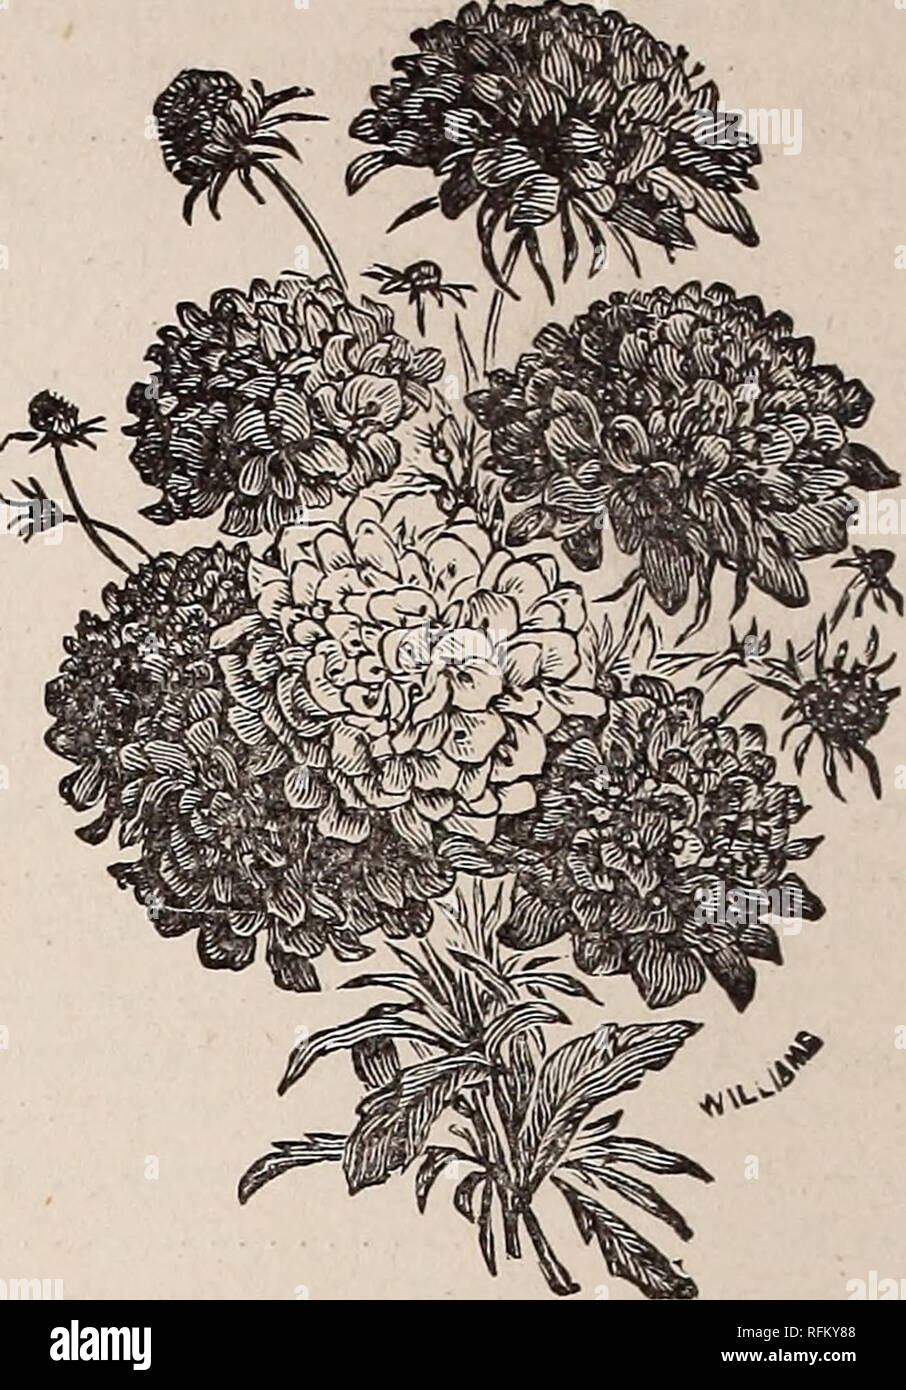 . Annual catalogue of garden, field and flower seeds : bulbs, plants, fertilizers and implements for the farm and garden. Vegetables Seeds Catalogs; Flowers Seeds Catalogs; Agricultural implements Catalogs; Commercial catalogs Rhode Island Providence. SALVIA.. SCABIOSA. Saintpaulia lonantha—The plants are very dwarf and spreading, and produce very freely, violet-like flowers, both in shape and color. Excellent for pot culture in the green-house or window 10 Salpiglossis — Grandiflora — Finest mixed. One of the most beautiful flowering plants, with very large, richly-colored Petunia-like flower Stock Photo